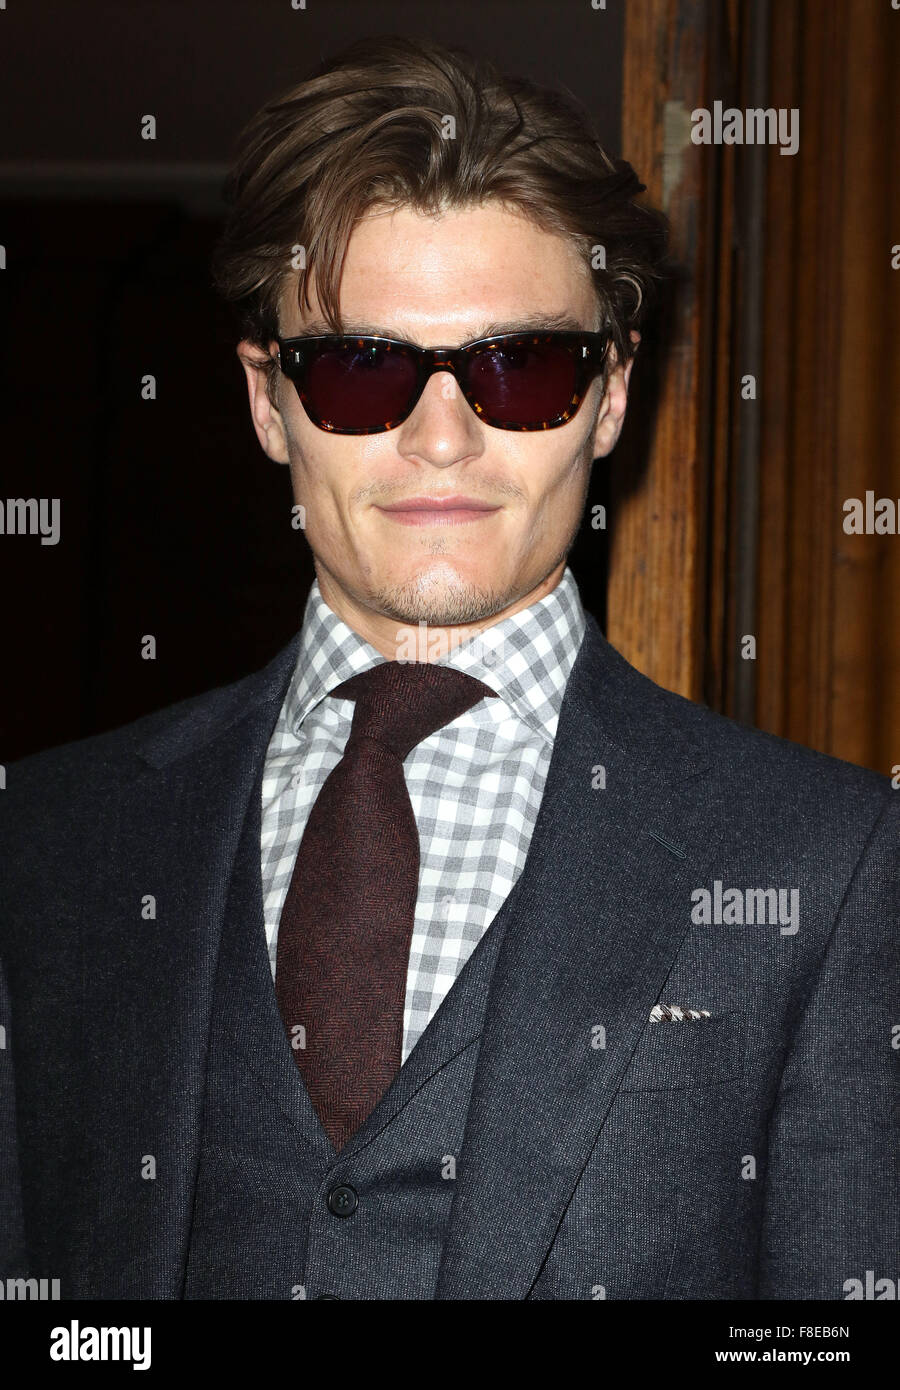 Apr 27, 2015 - London, England, UK - Oliver Cheshire attending LDNY Fashion show and WIE Award Gala at Goldsmiths' Hall Stock Photo